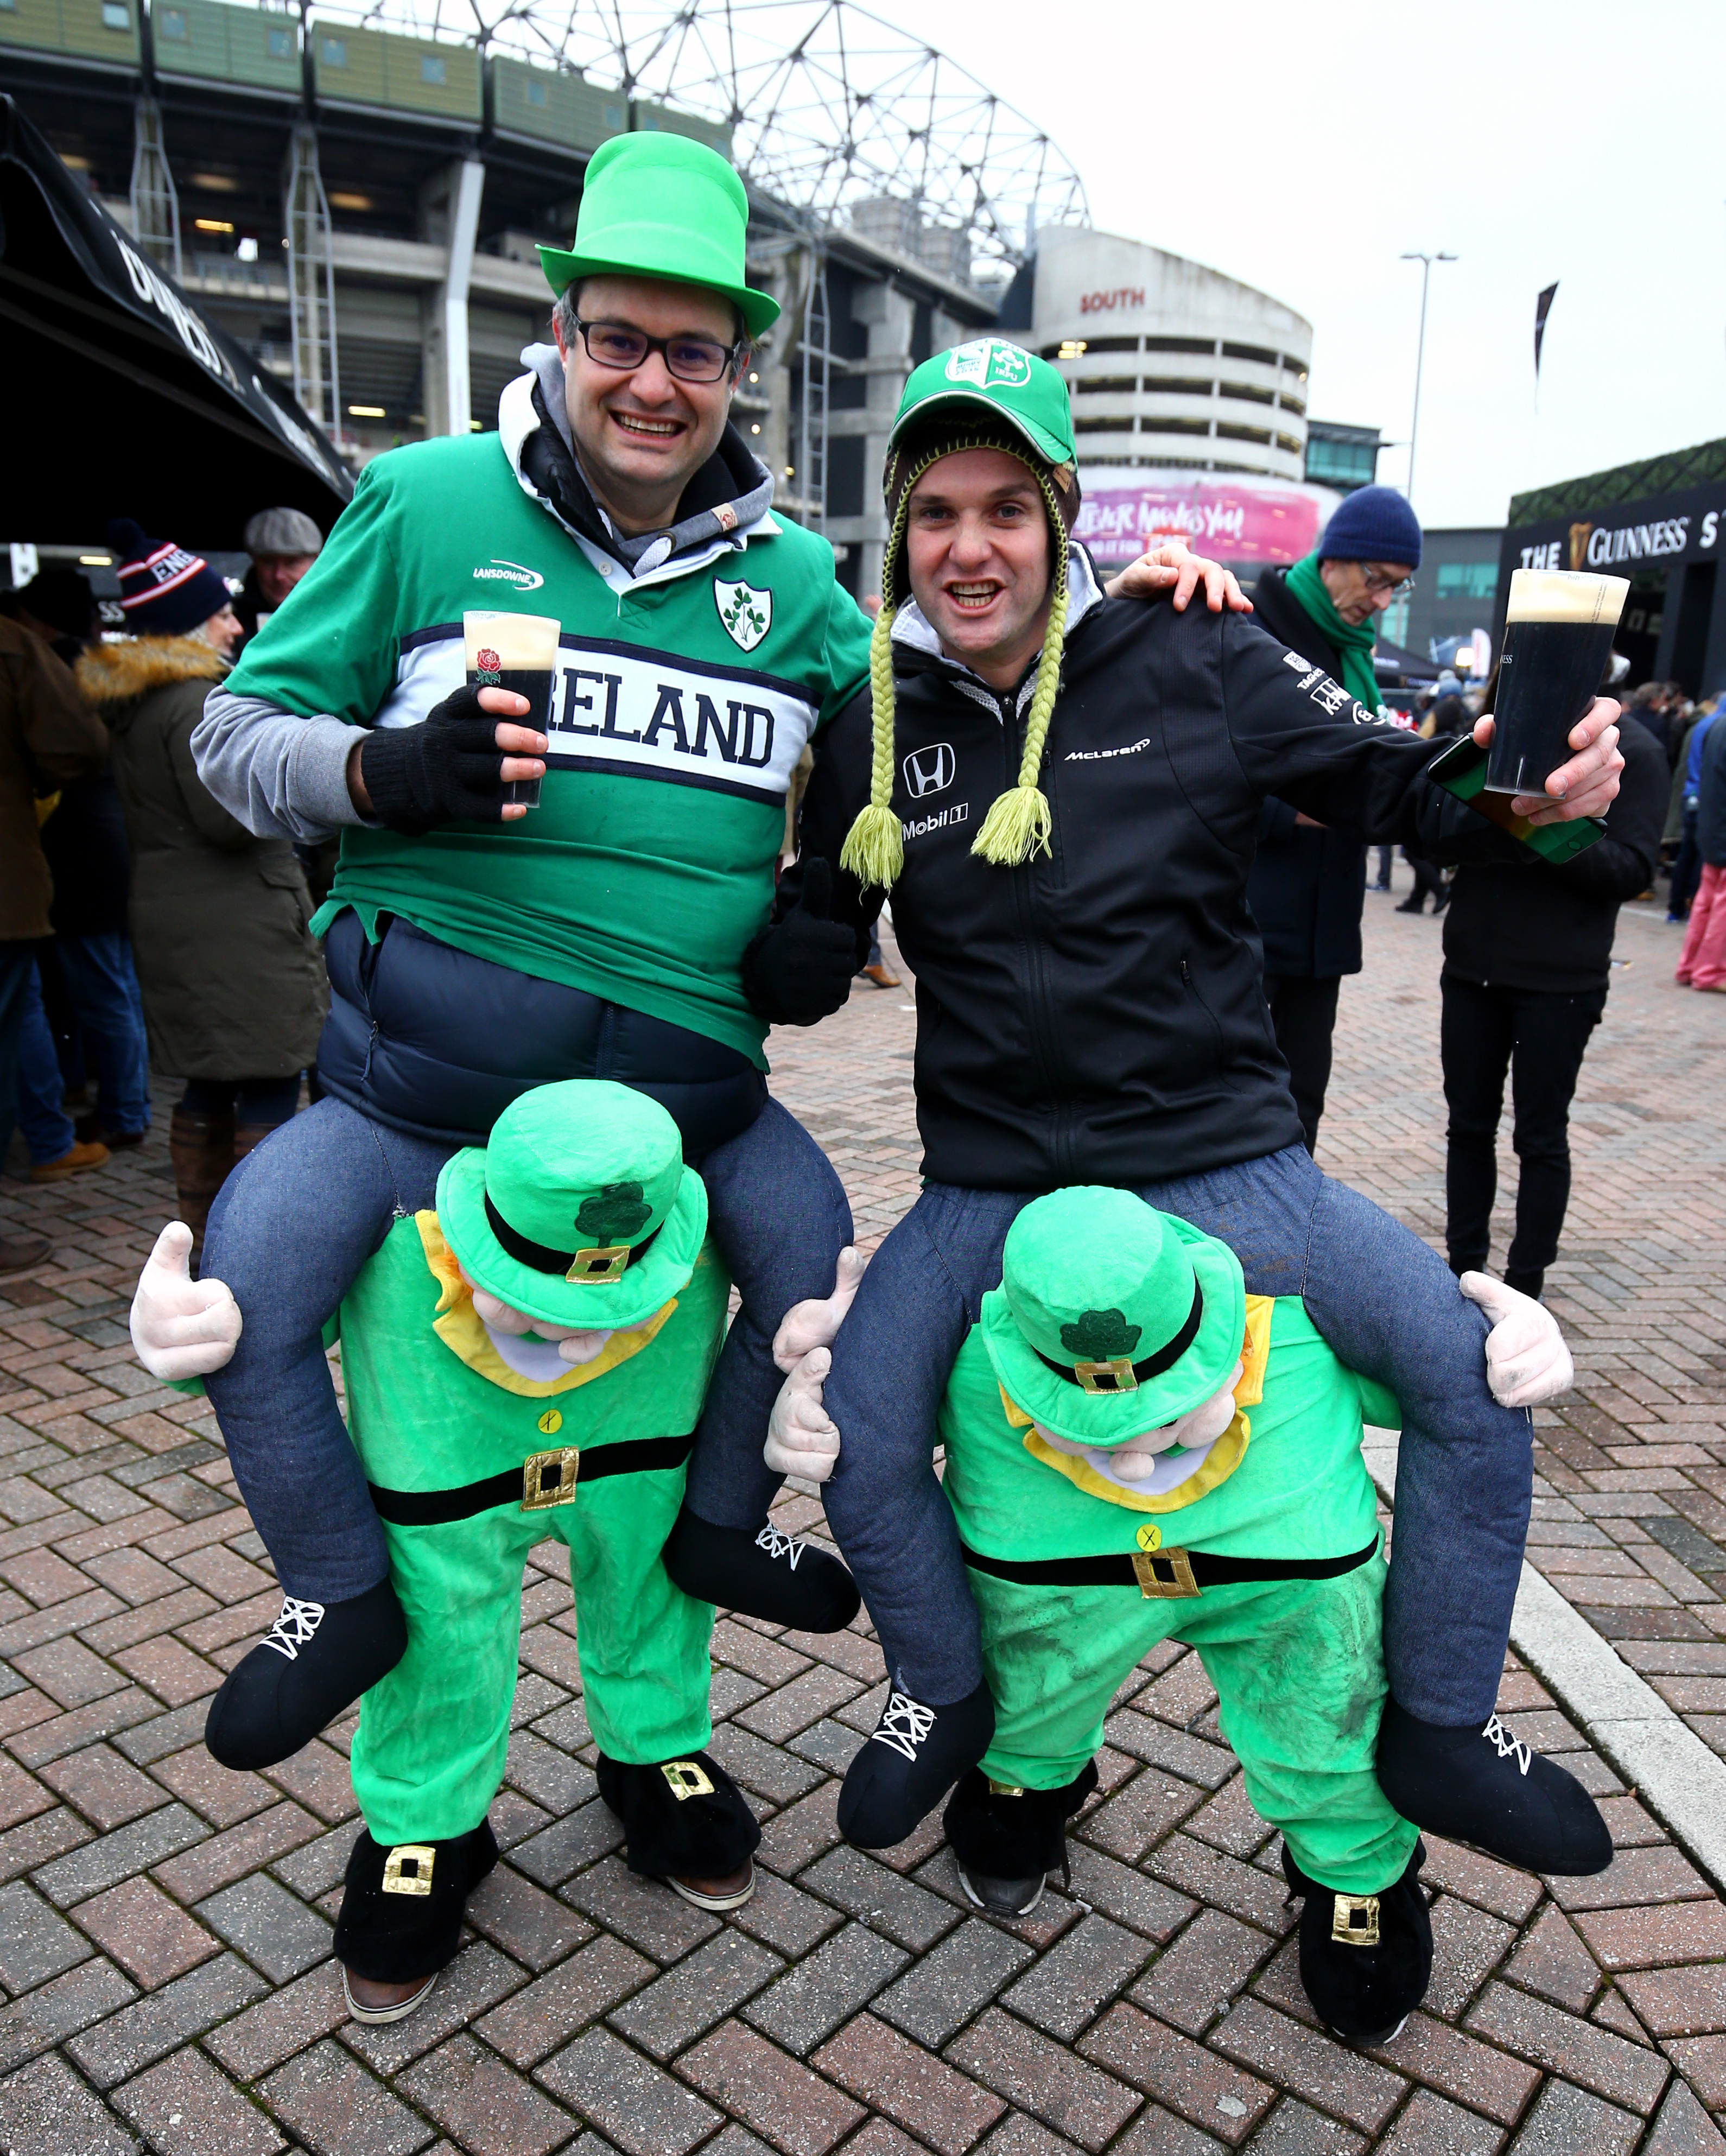 Ireland fans pose for a picture prior to the NatWest 6 Nations match at Twickenham Stadium, London